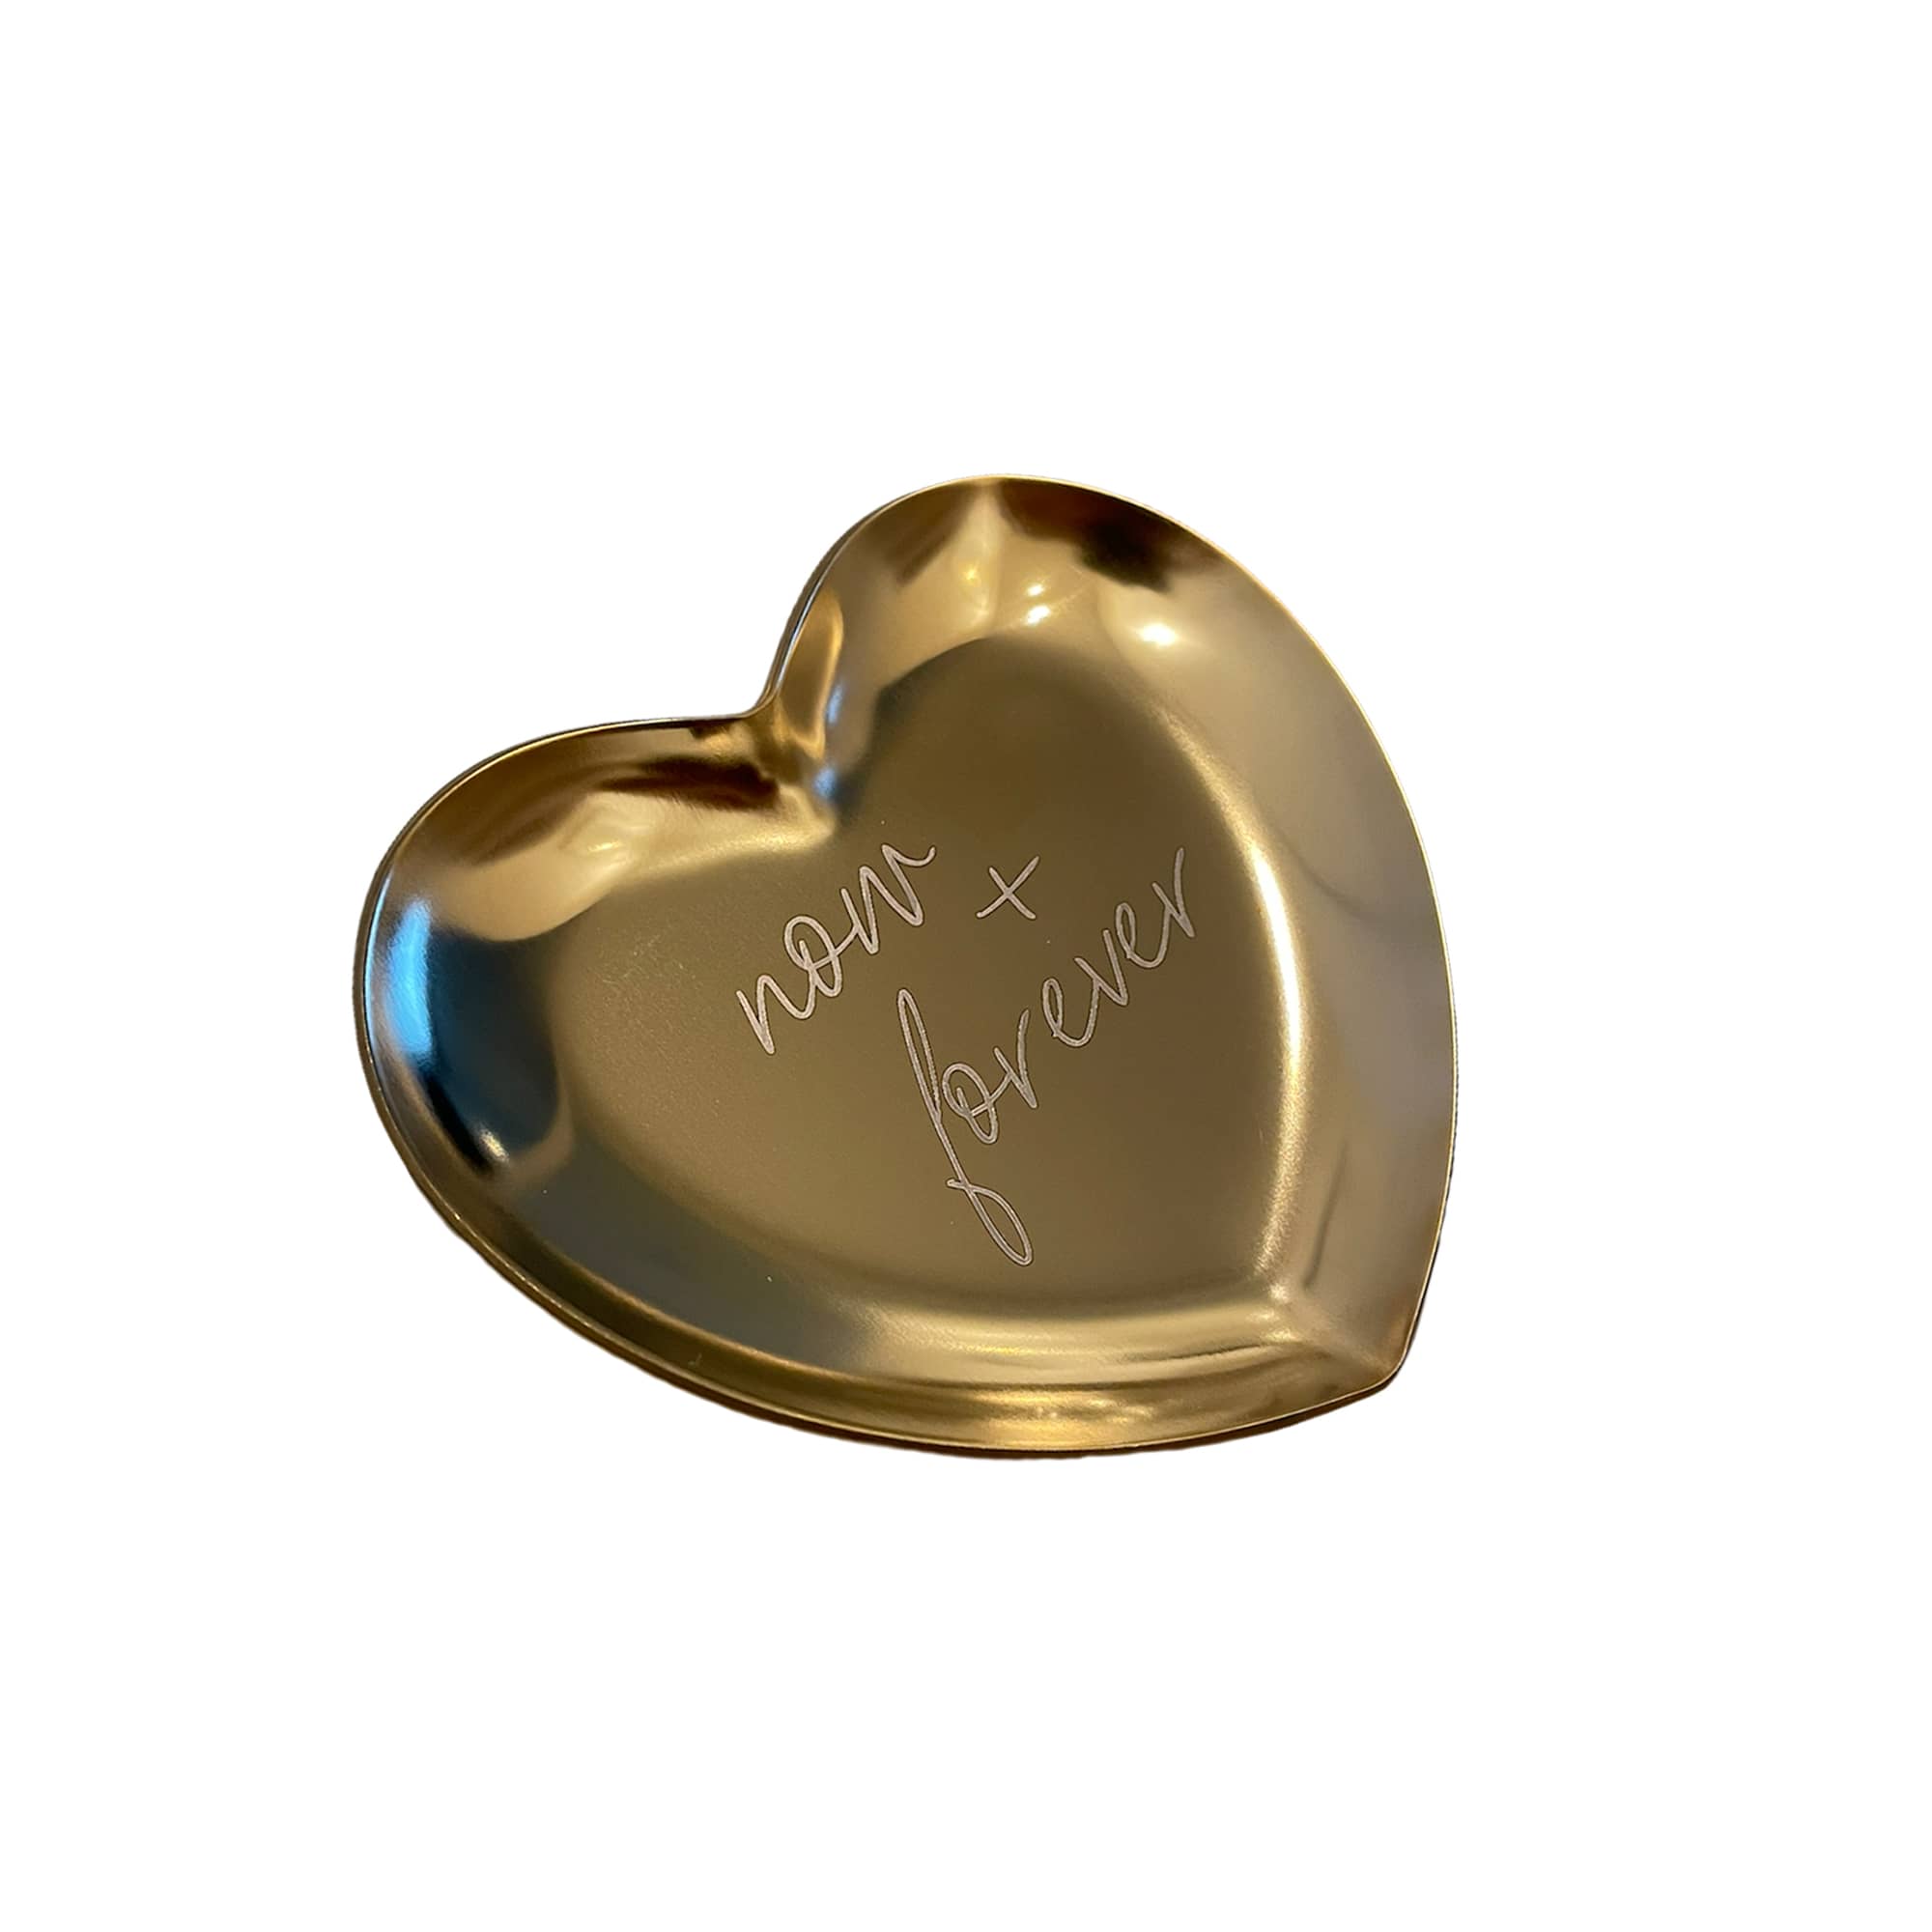 Small heart shaped bowl / tray "now + forever", Gold